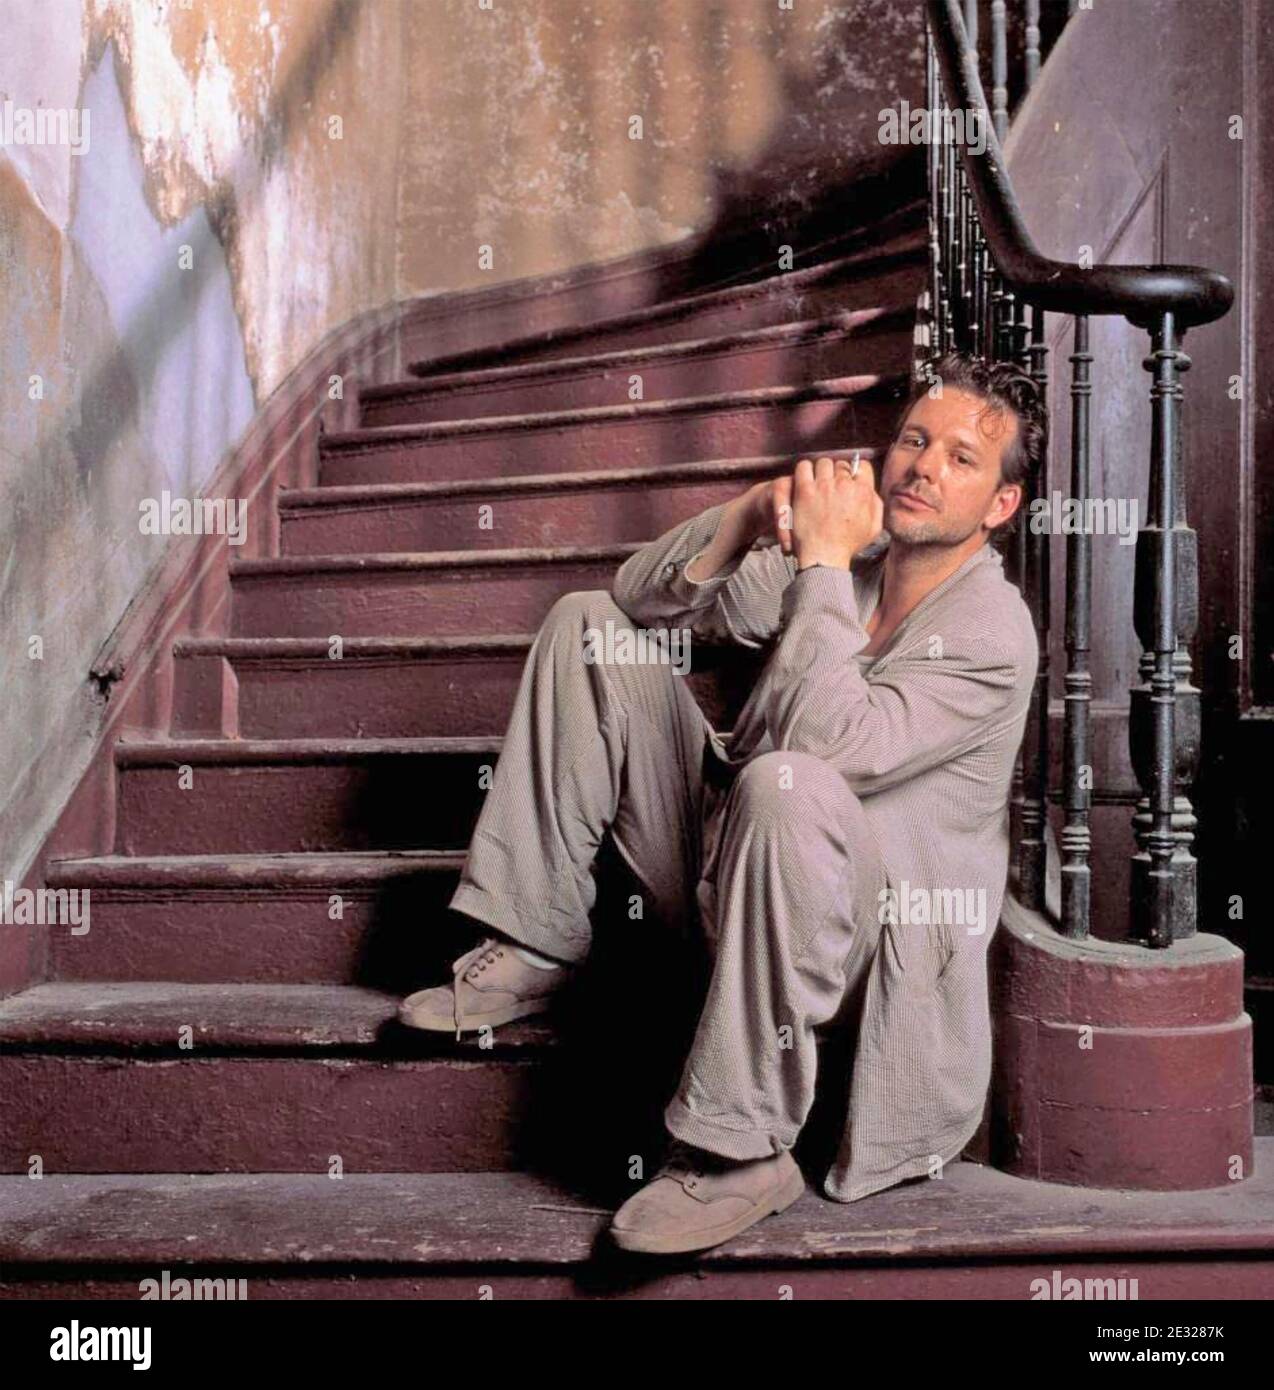 ANGEL HEART 1987 Tr-Star Pictures film with Mickey Rourke Stock Photo